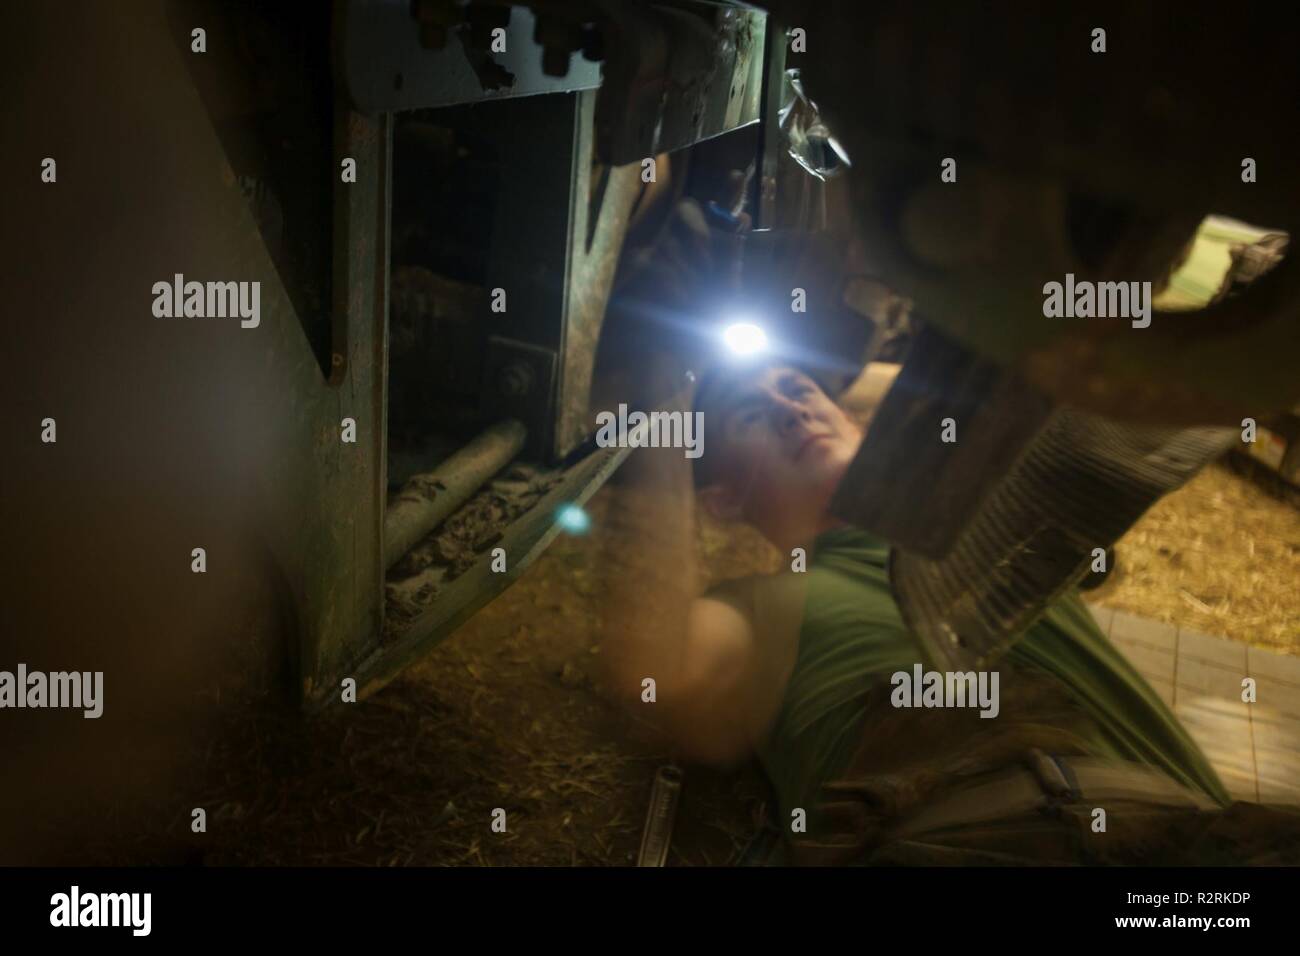 U.S. Marine Corps Lance Cpl. Kevin Kubinak, with Combat Logistics Battalion 251 (CLB 251), 2nd Marine Logistics Group-Forward, works underneath a Medium Tactical Vehicle Replacement wrecker in Voll, Norway, Nov. 1, 2018. Marines of CLB 251 provided mechanic support to the units of 2nd Marine Logistics Group-Forward during Exercise Trident Juncture 18. The exercise enhances the U.S. and NATO Allies’ and partners’ abilities to work together collectively to conduct military operations under challenging conditions. Stock Photo